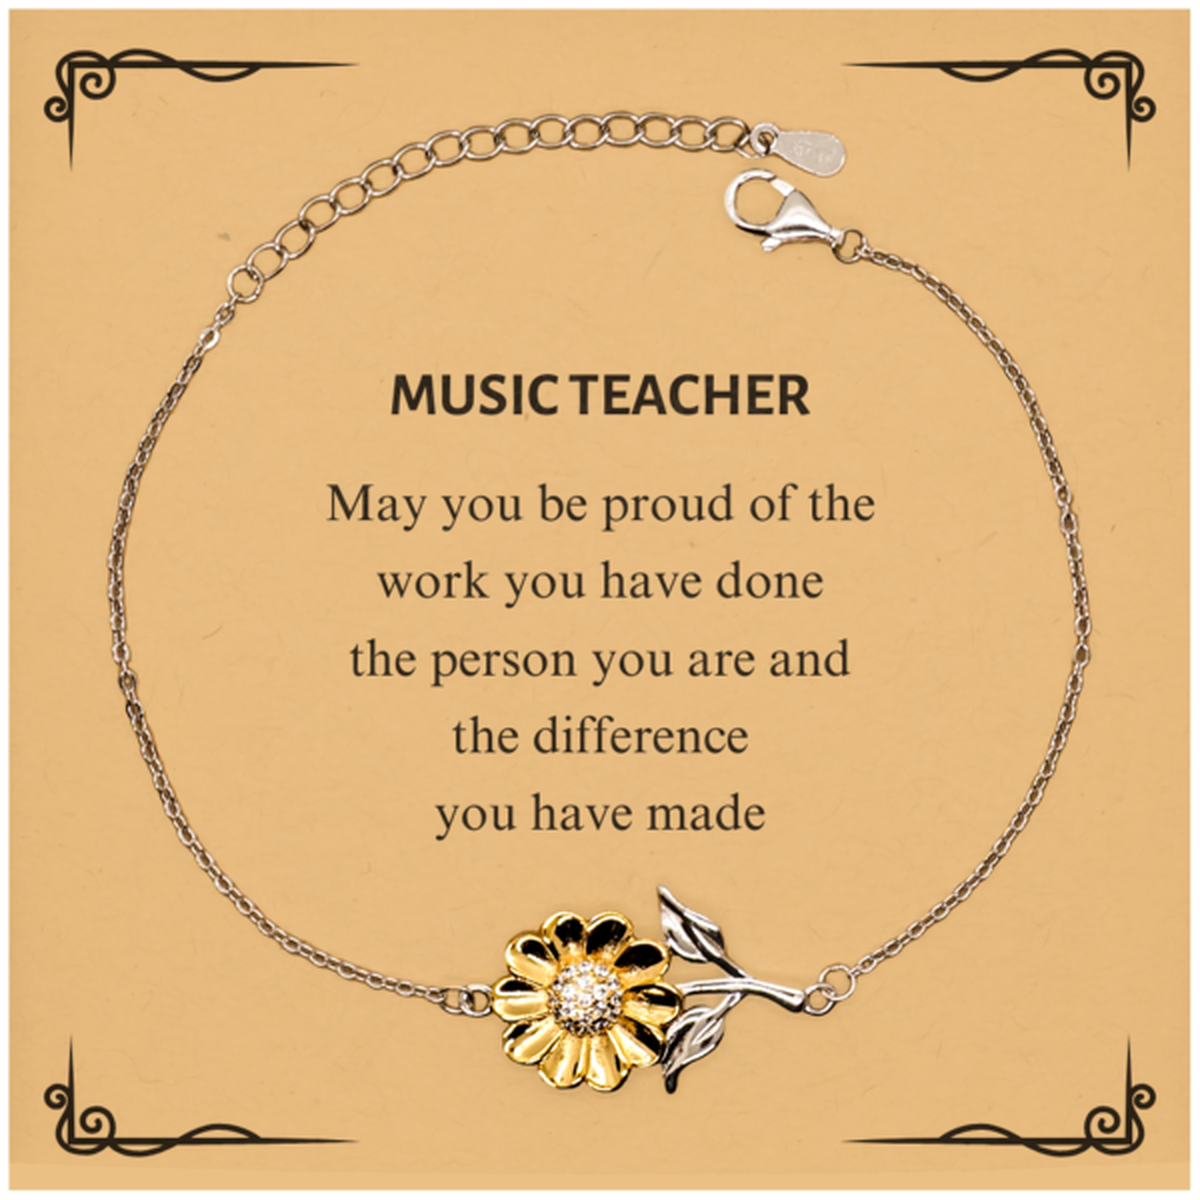 Music Teacher May you be proud of the work you have done, Retirement Music Teacher Sunflower Bracelet for Colleague Appreciation Gifts Amazing for Music Teacher